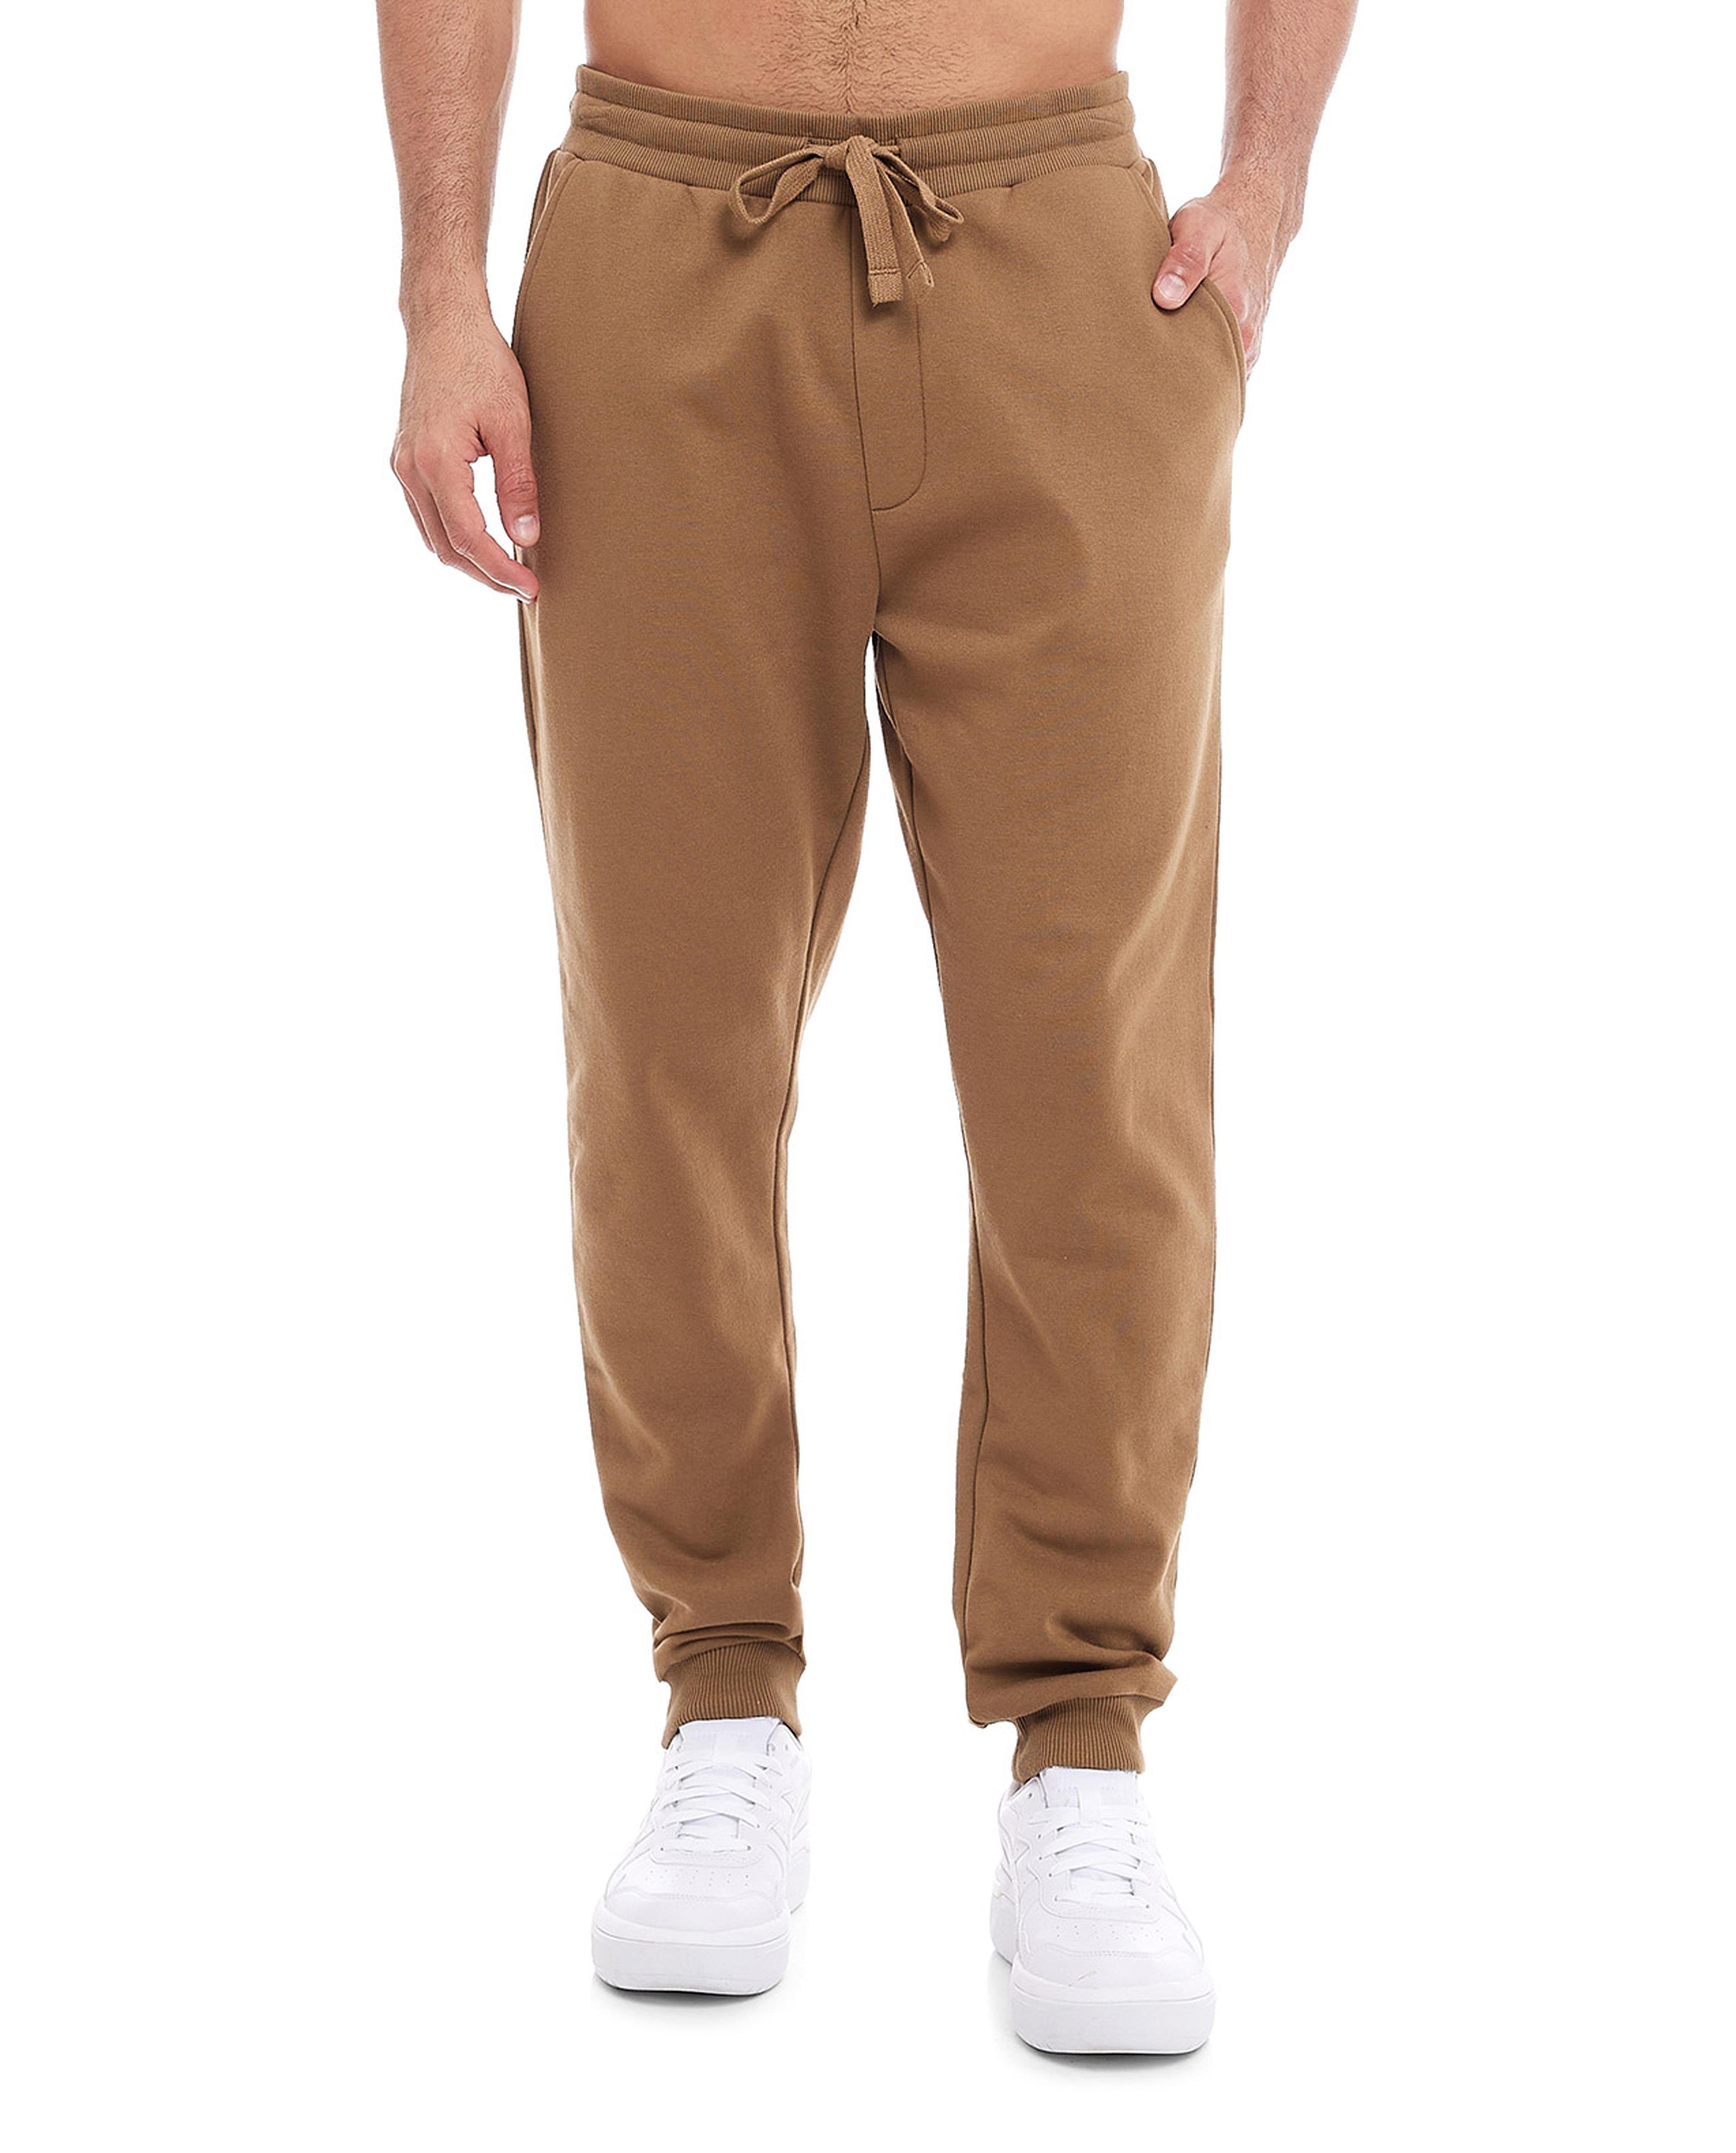 Solid Knit Joggers with Drawstring Waist